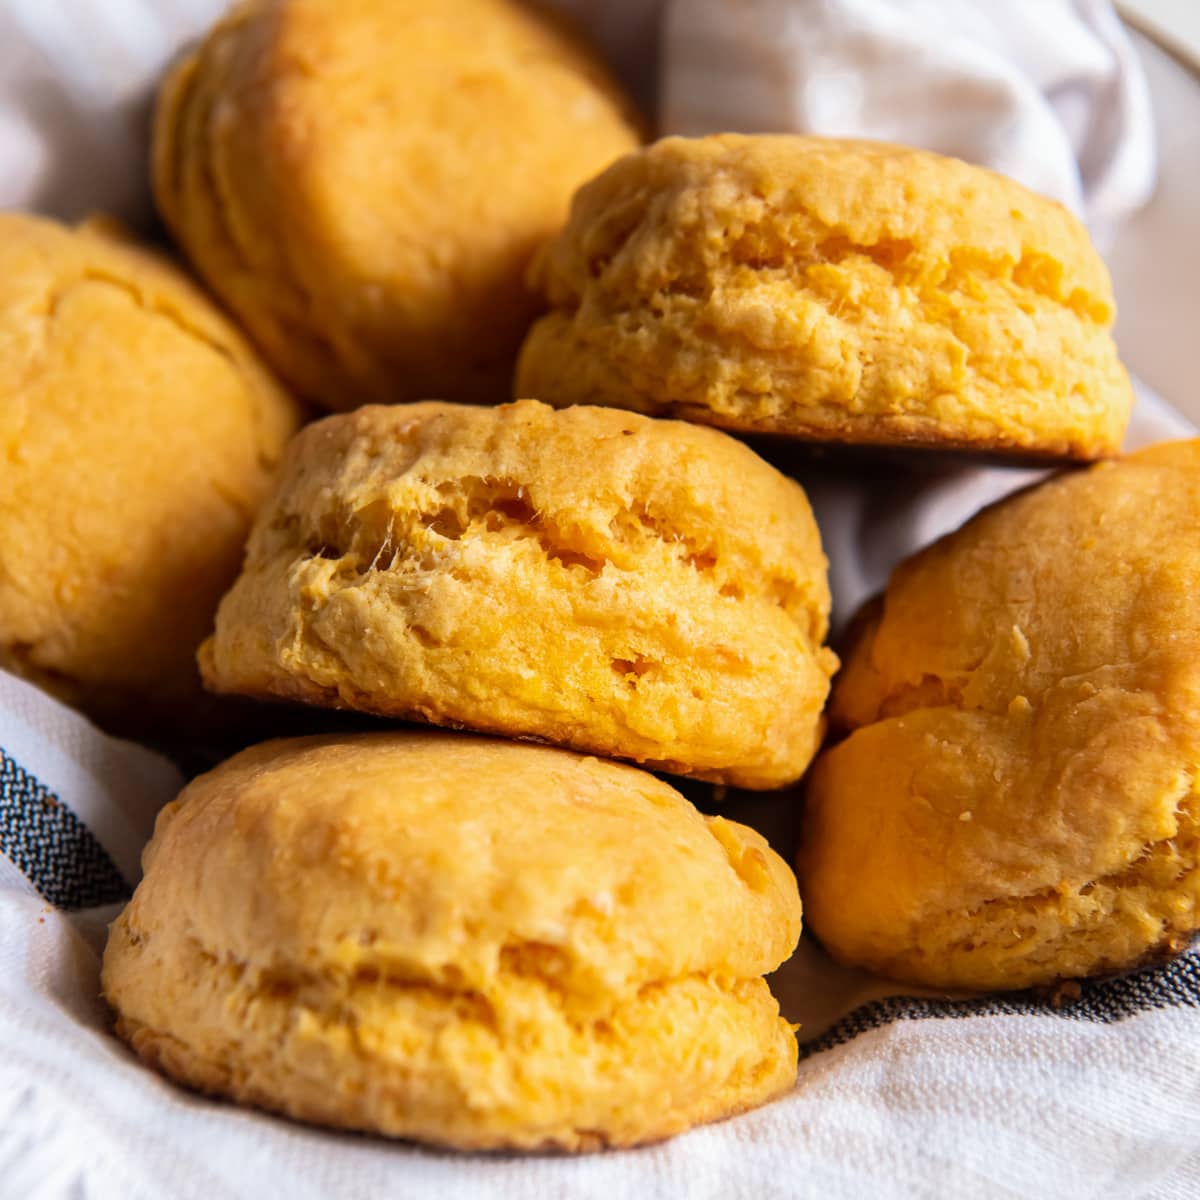 several sweet potato biscuits on a kitchen cloth in a basket.